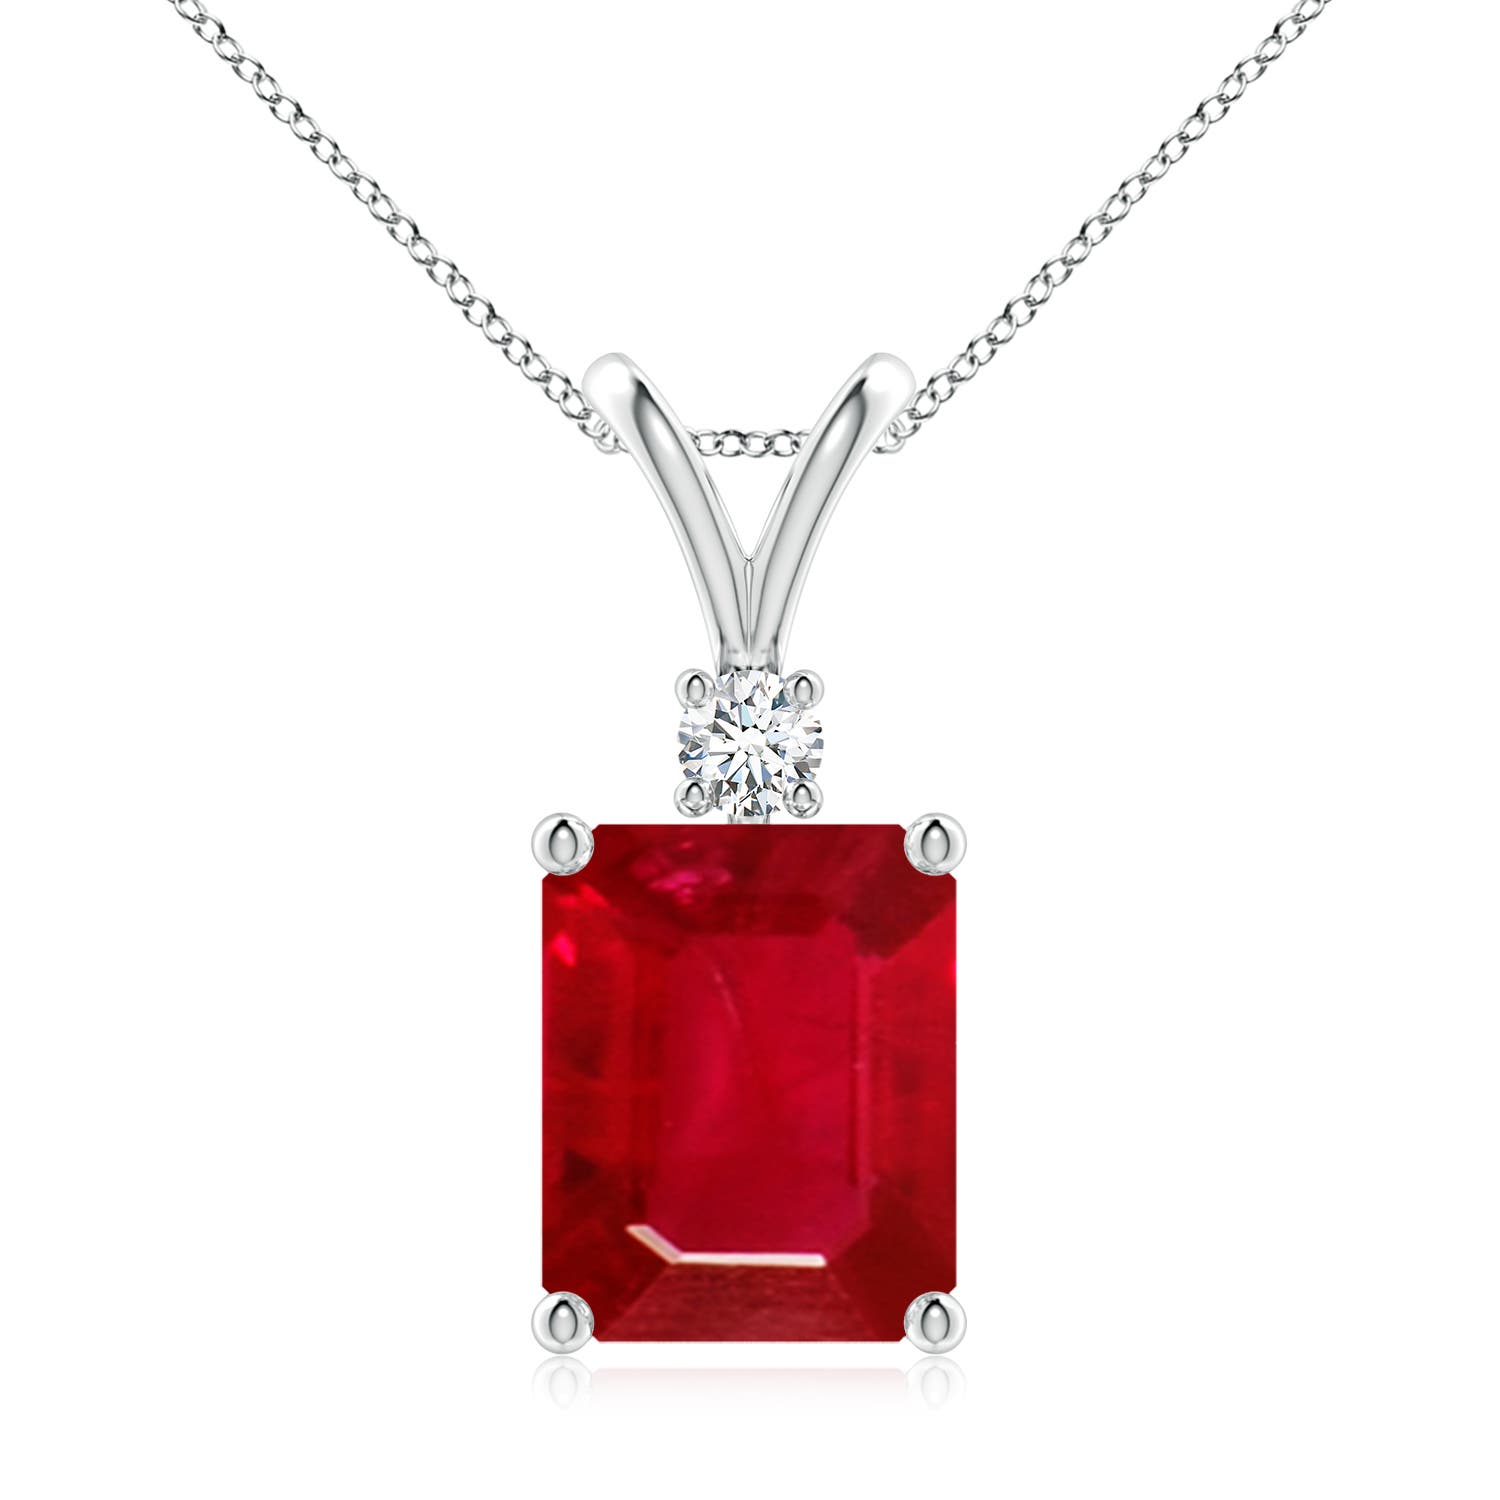 AAA - Ruby / 4.11 CT / 14 KT White Gold